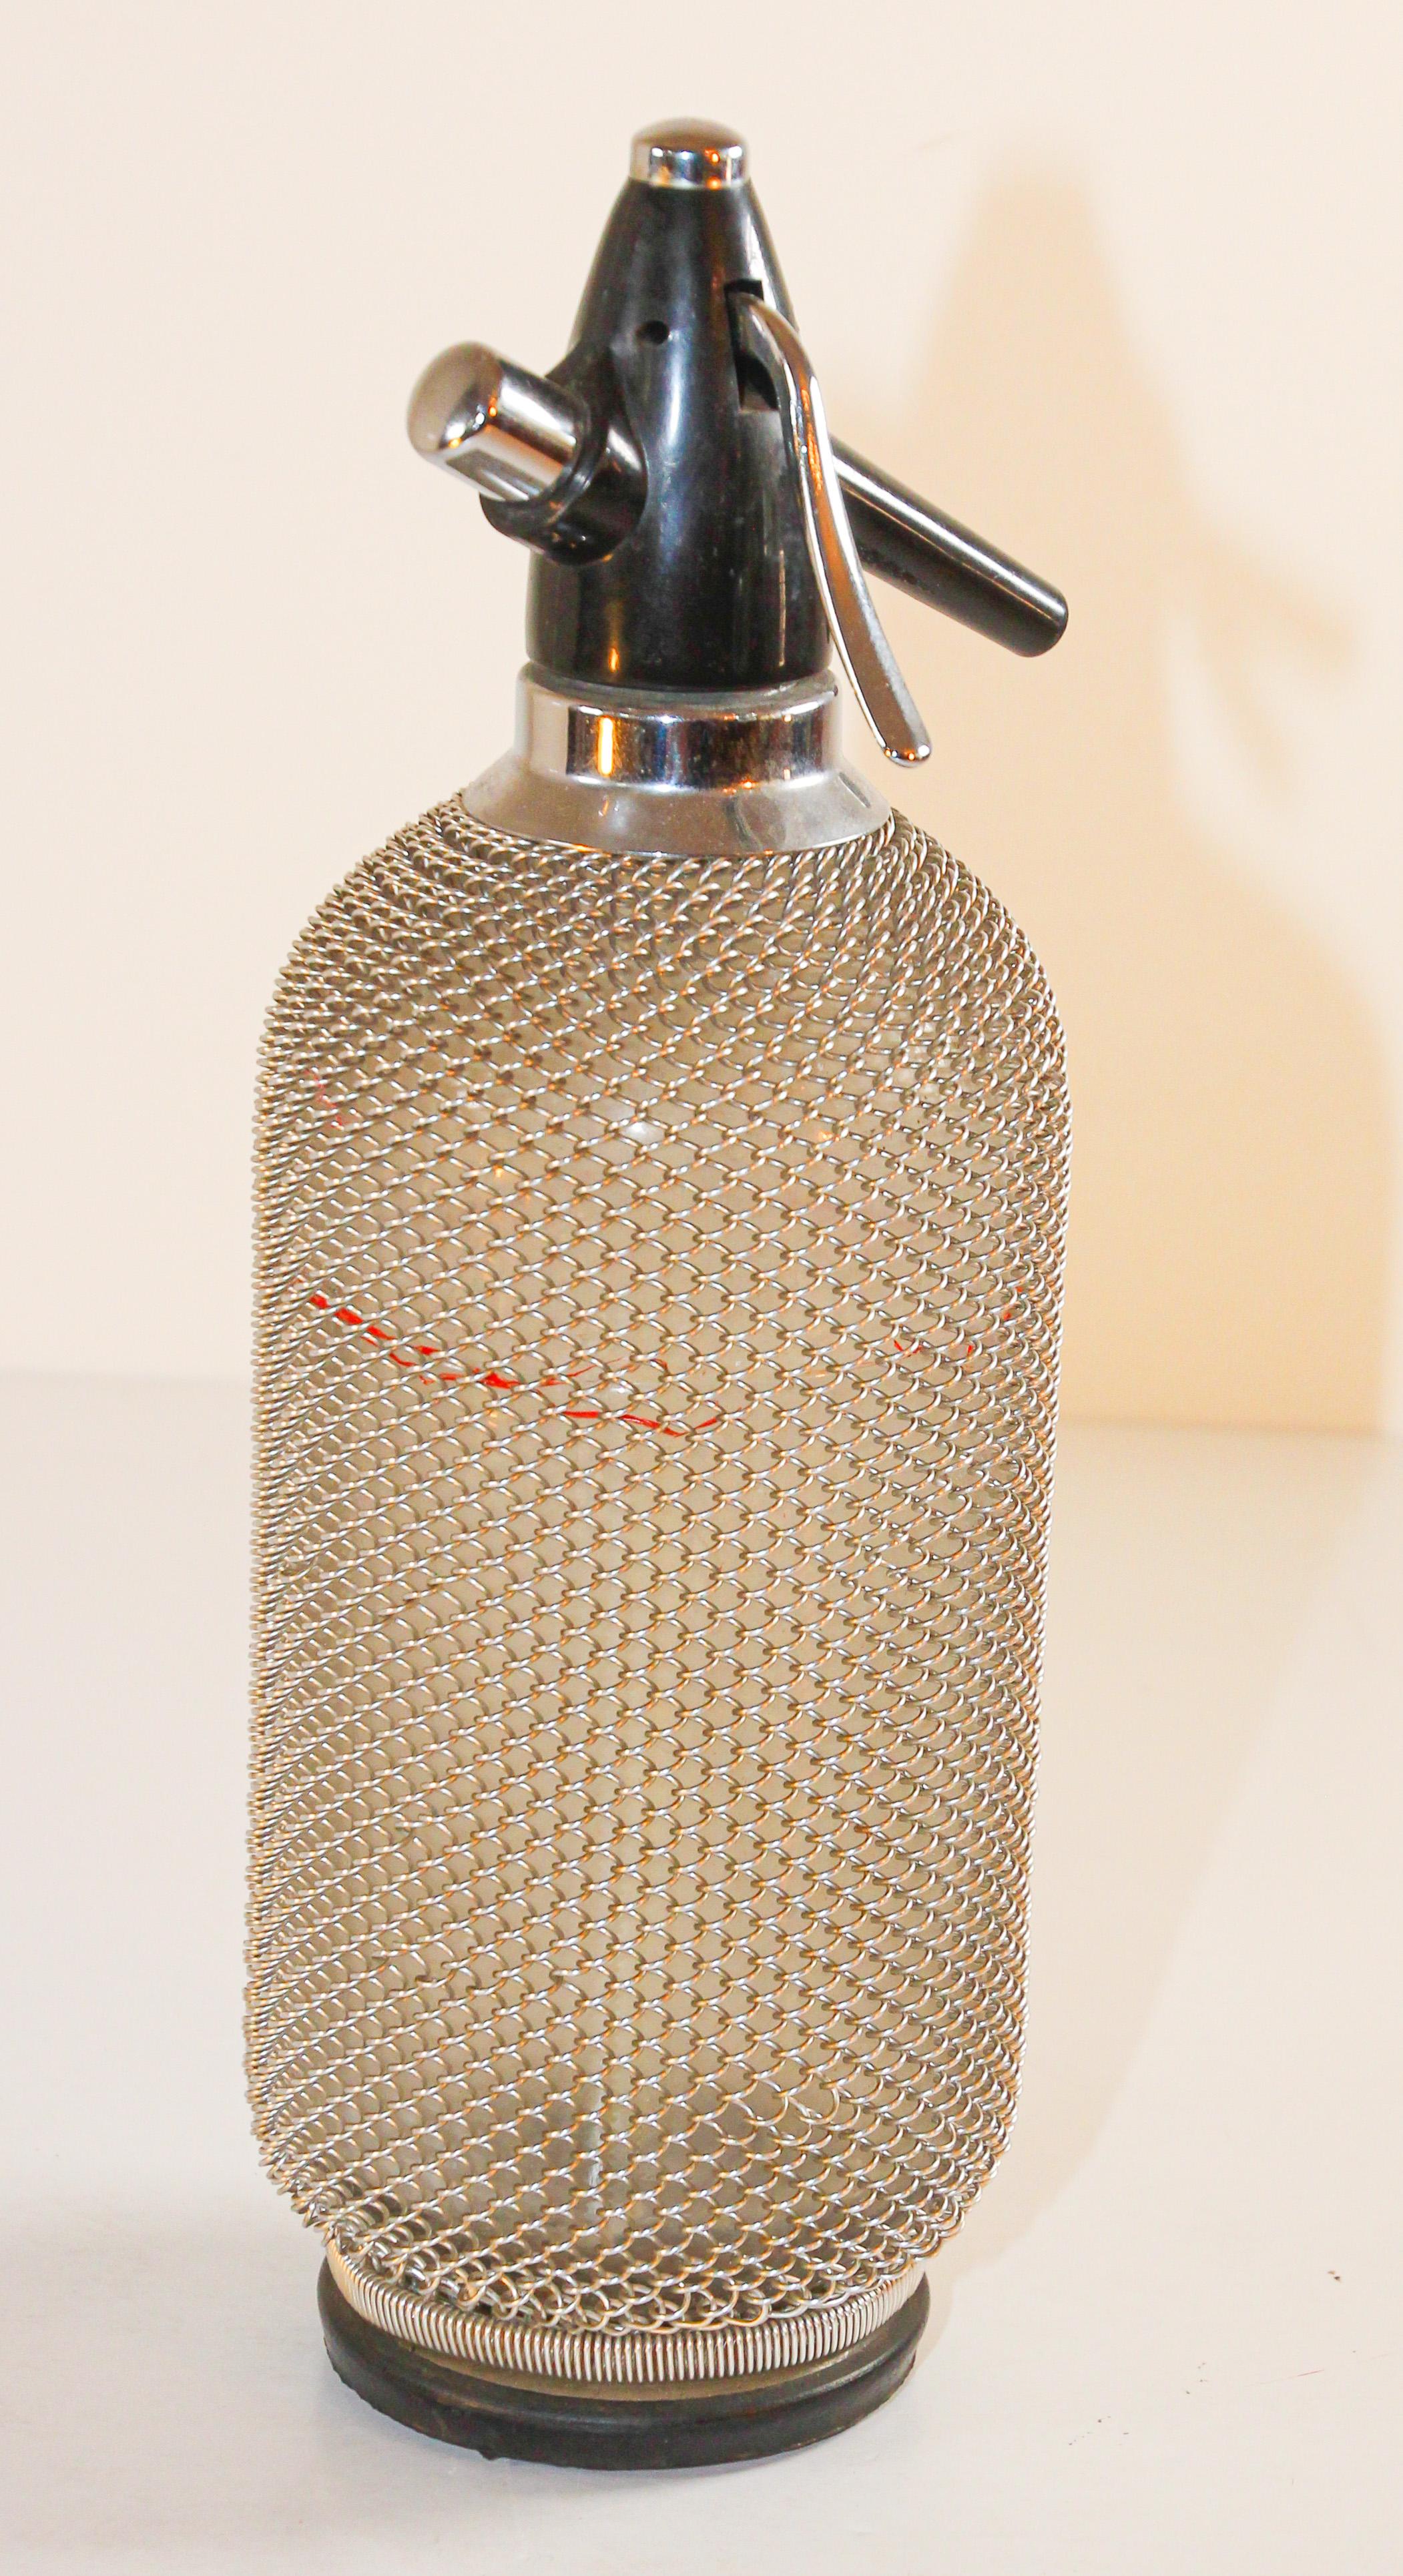 This is a fantastic vintage seltzer bottle with a metal wire mesh casing around the glass from the 1970.
Enjoy the fresh and healthy fizz of sparkling water, carbonated juice drinks, wine spritzers, and handcrafted cocktails. 
Vintage barware